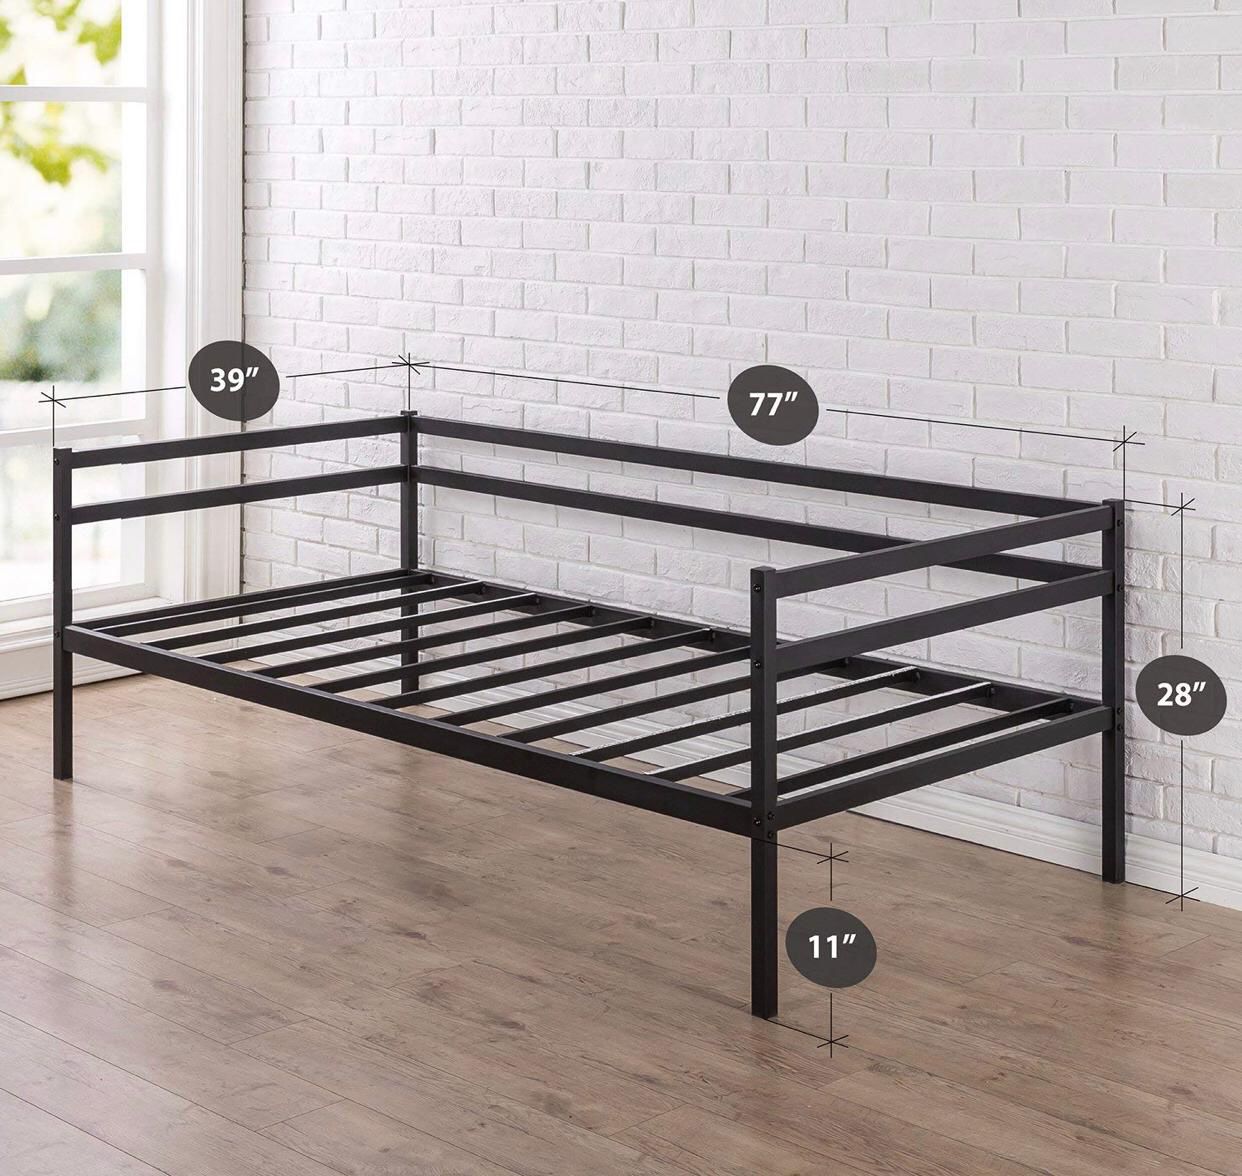 Twin daybed frame